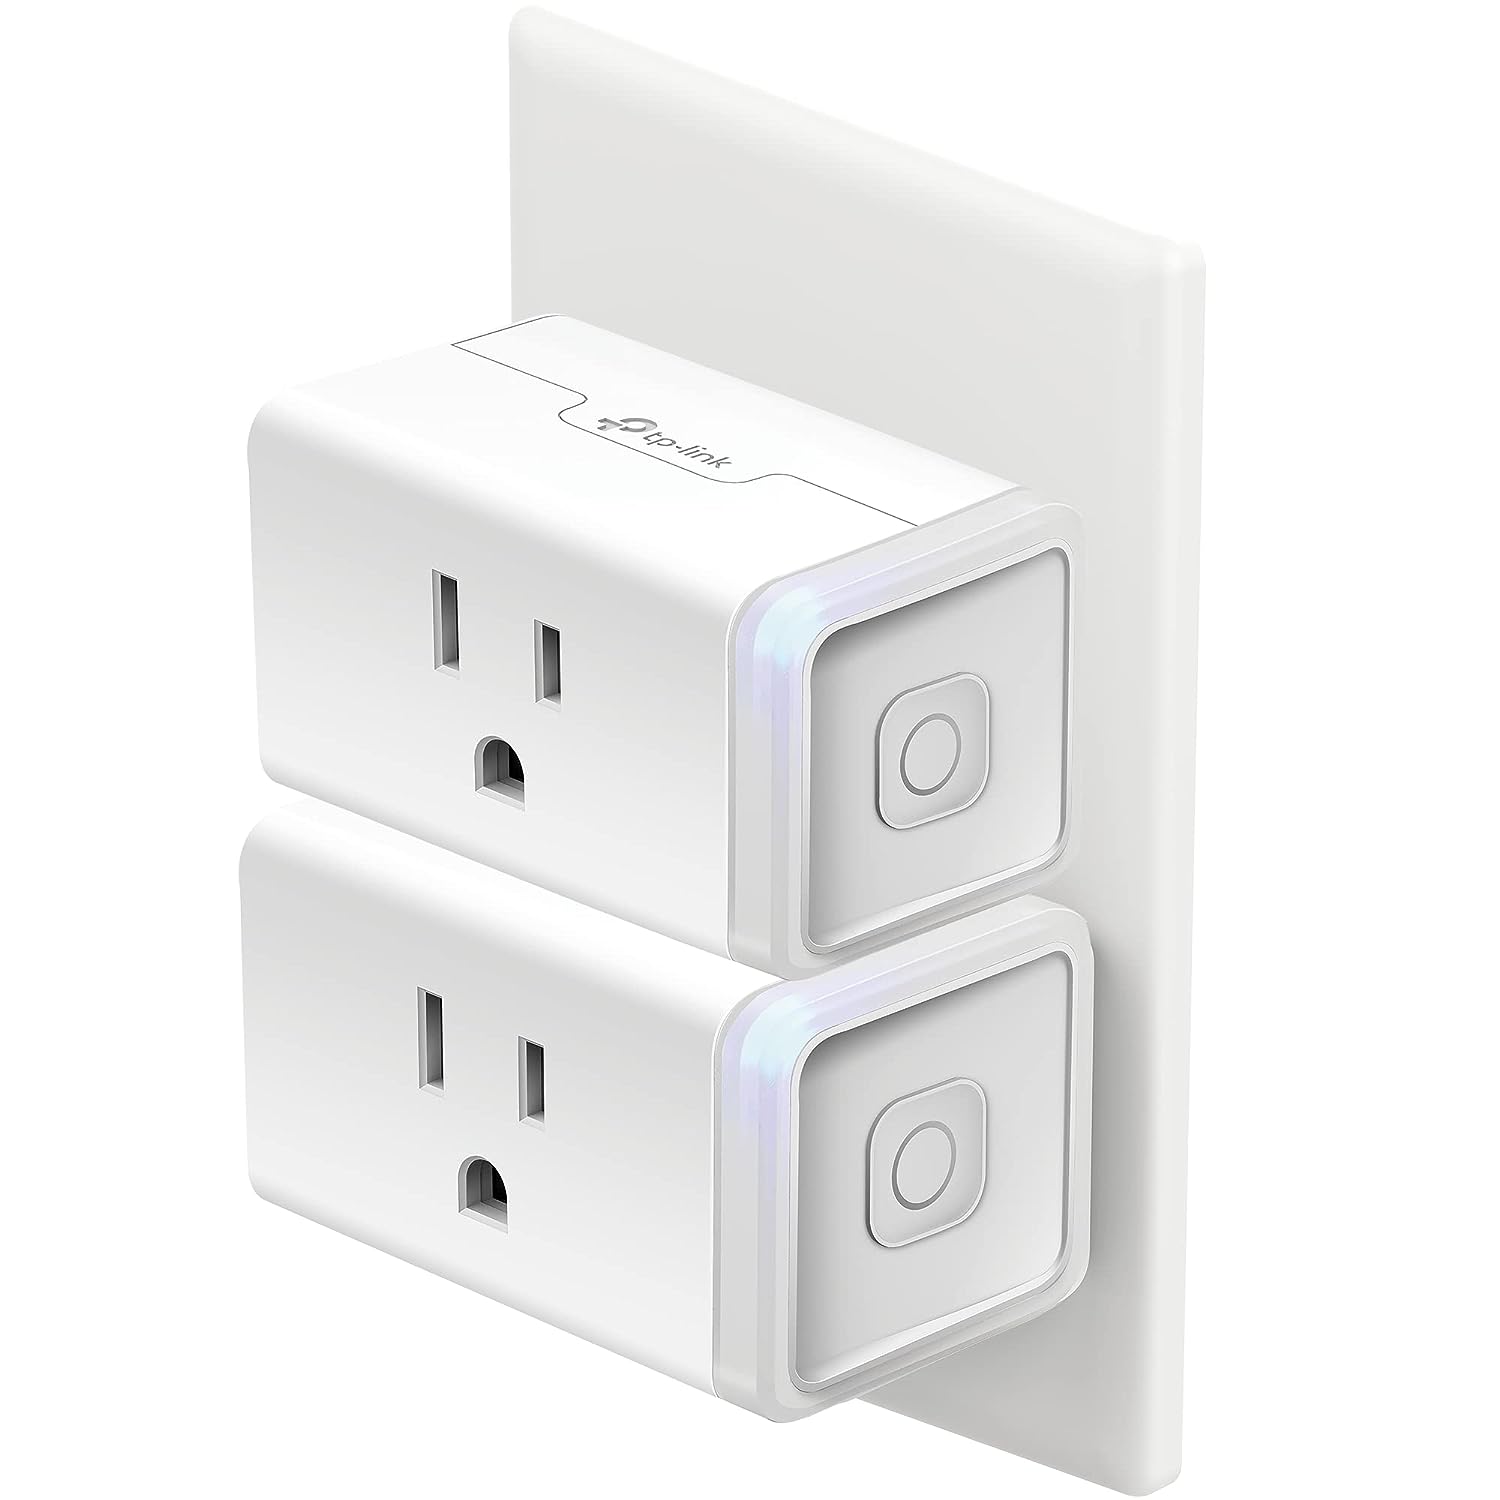 double smart plug for smart home wall outlets